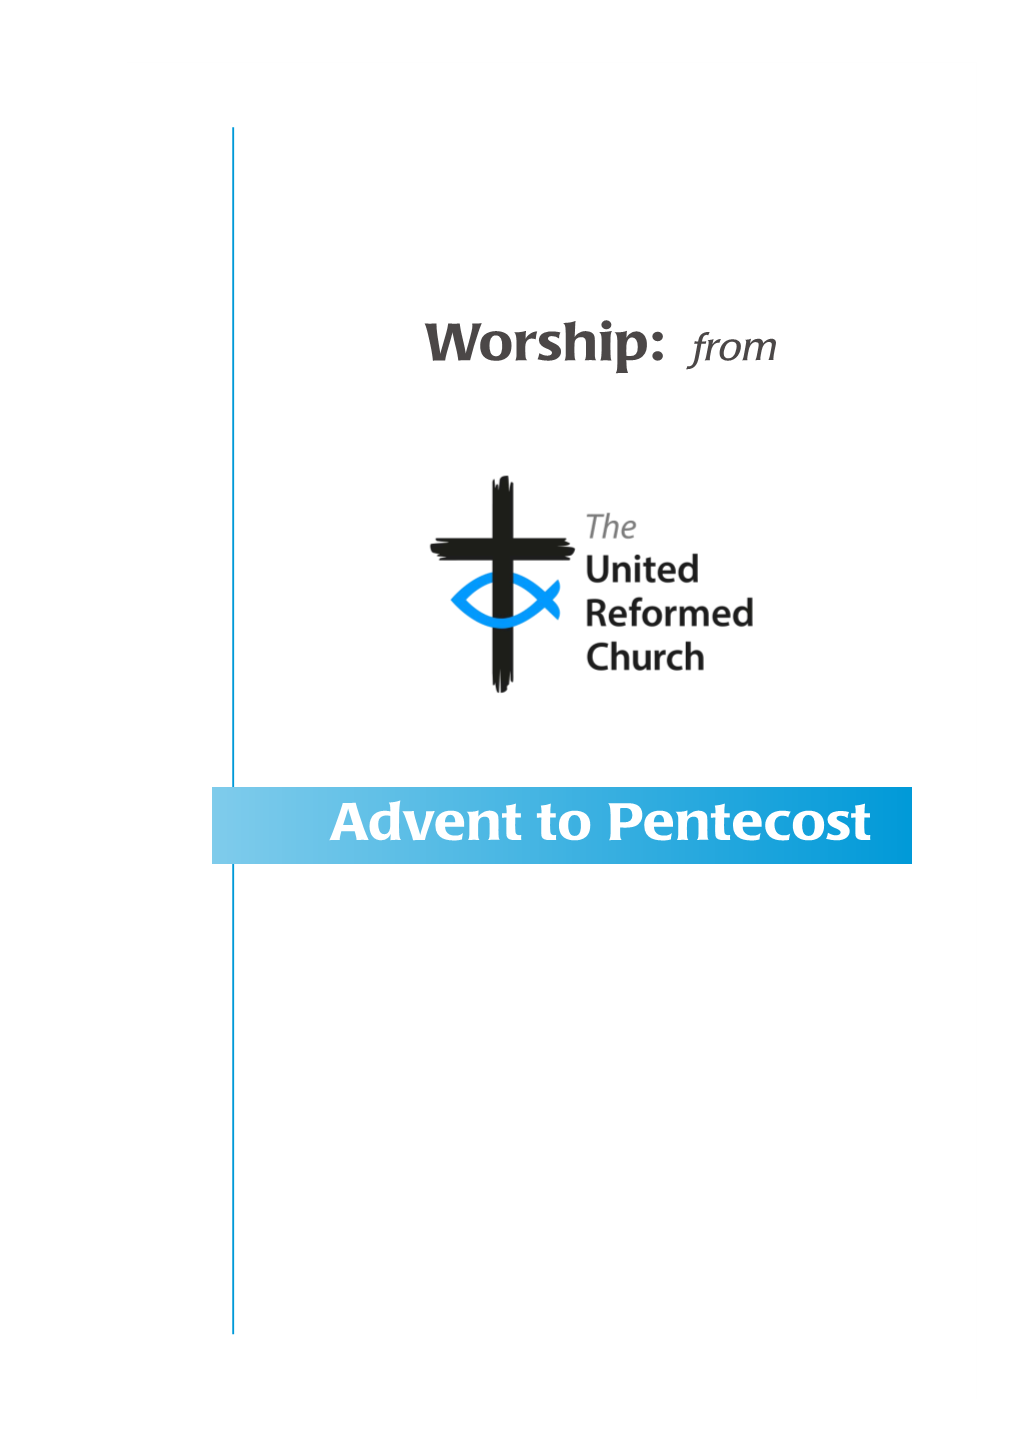 From Advent to Pentecost